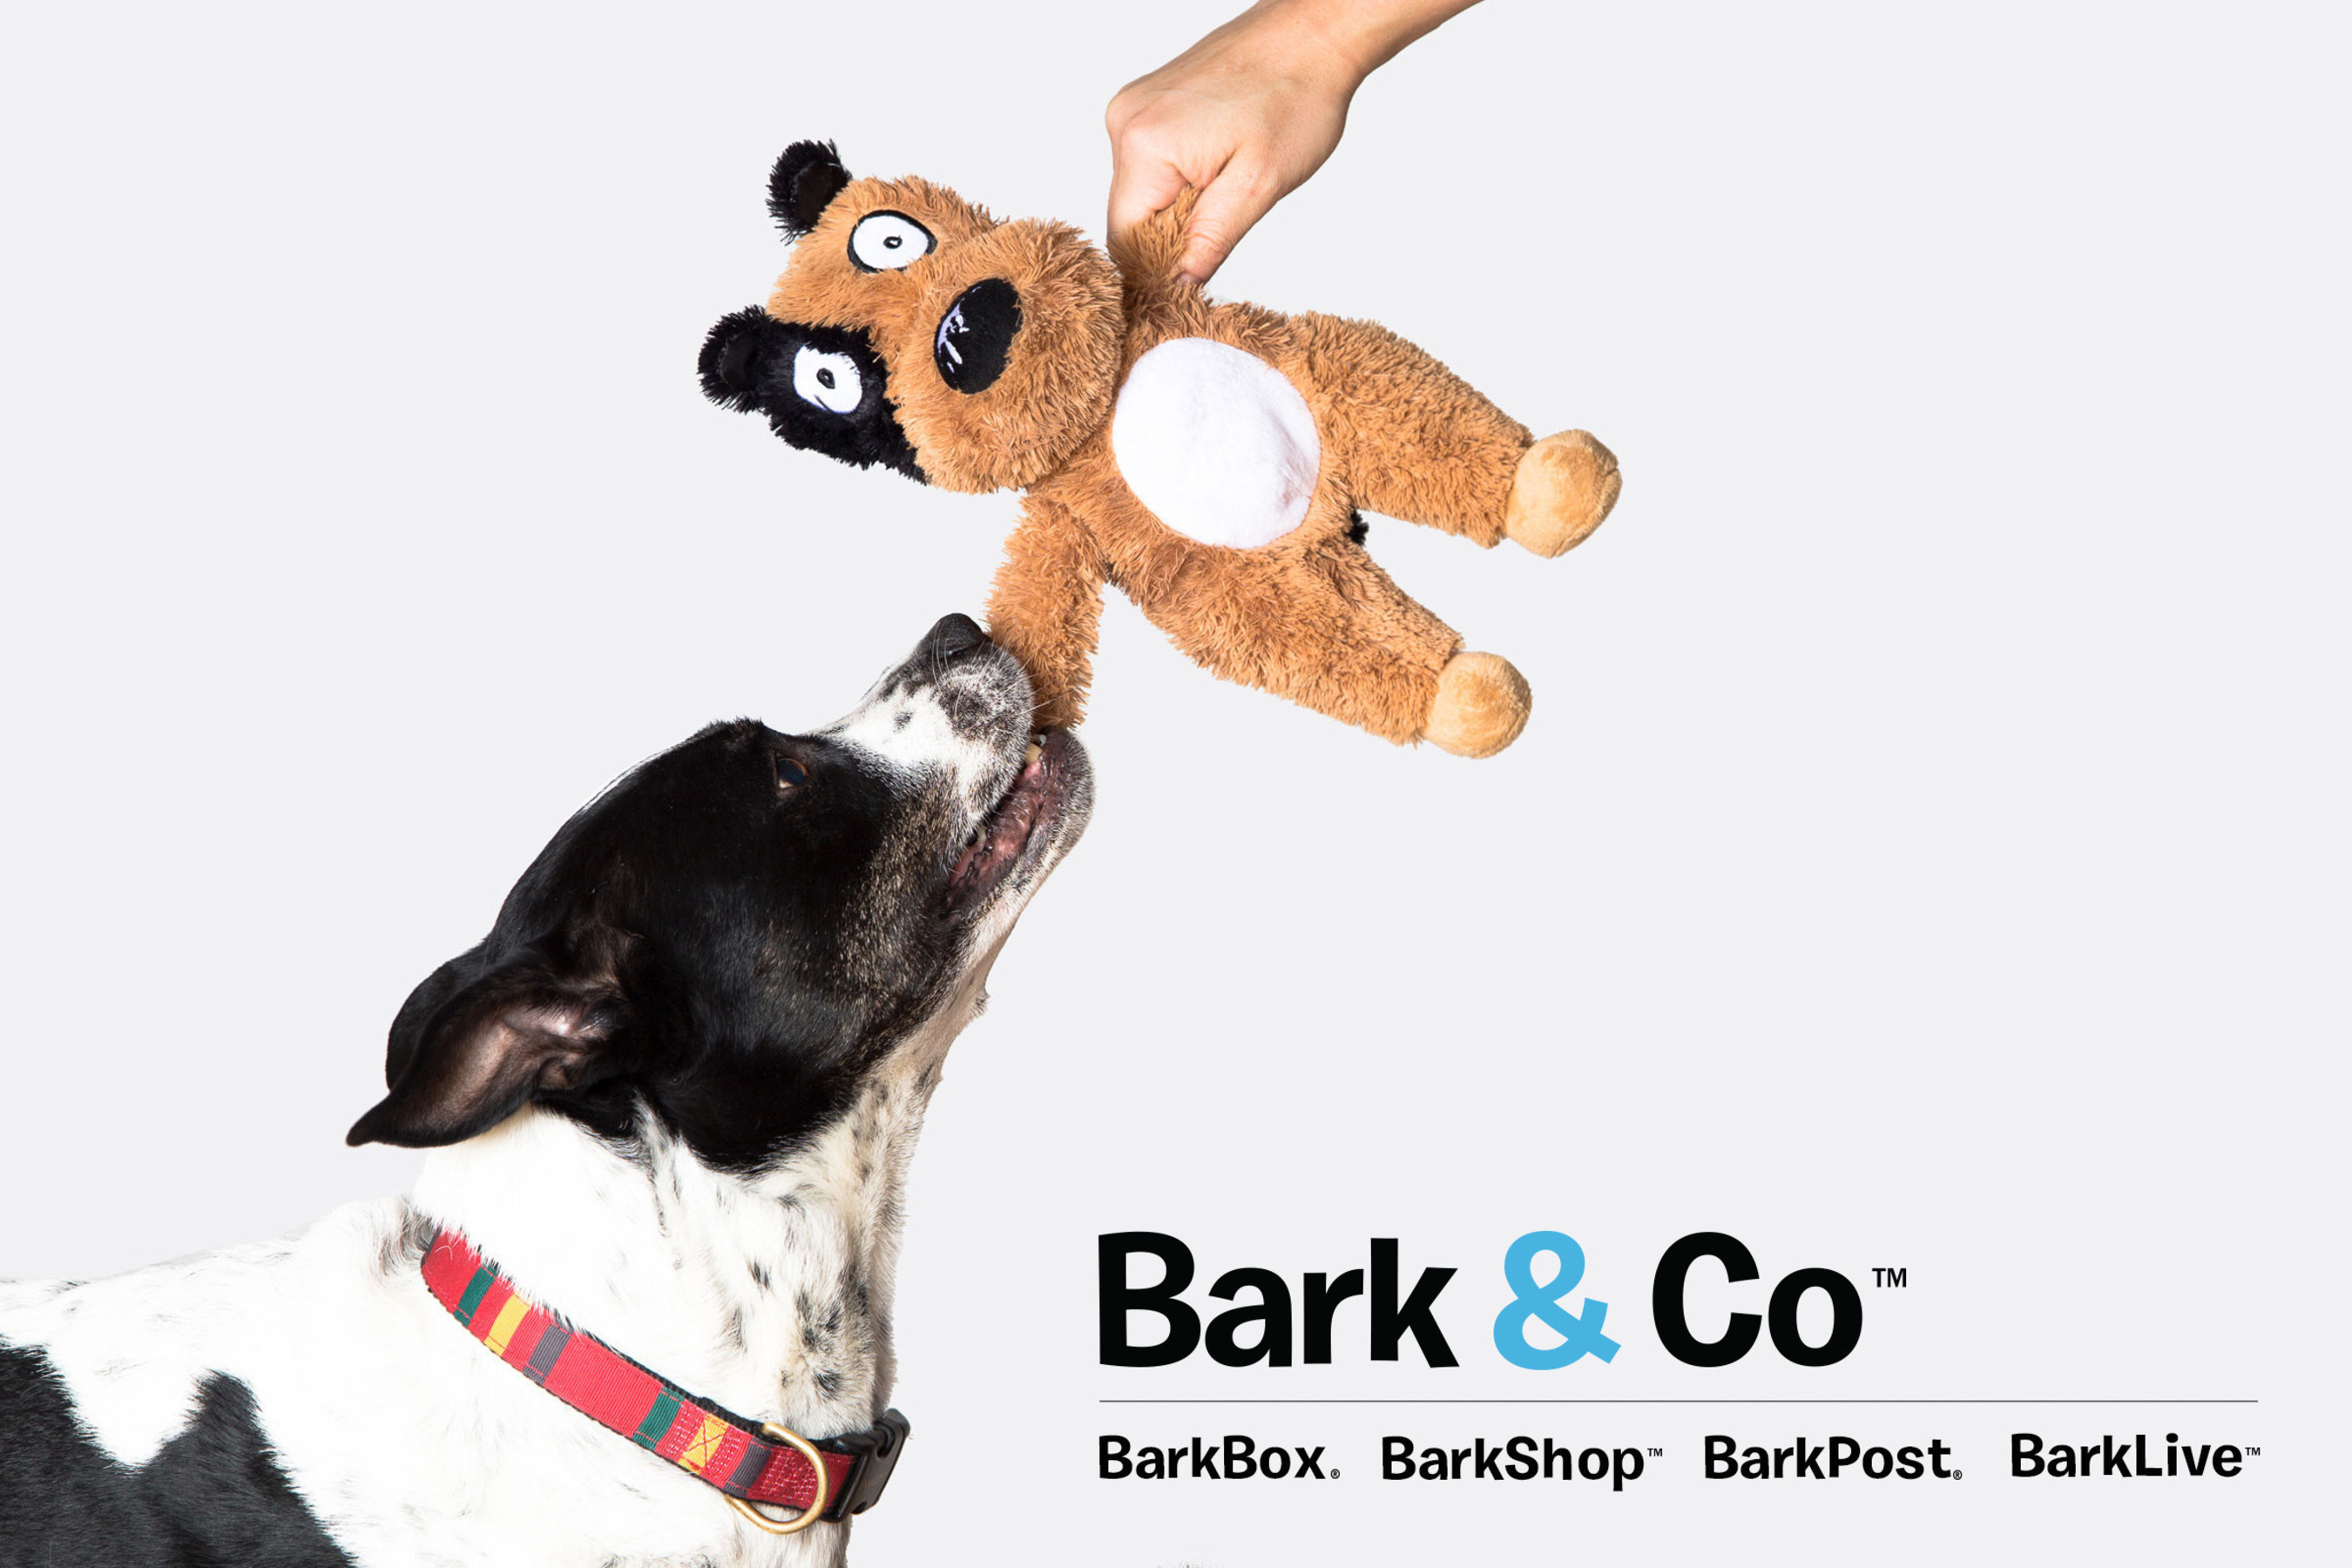 Bark & Co, the company behind BarkBox, BarkShop, BarkPost and BarkLive, announced $60 million in new funding to grow and expand its offerings for dogs and their people.